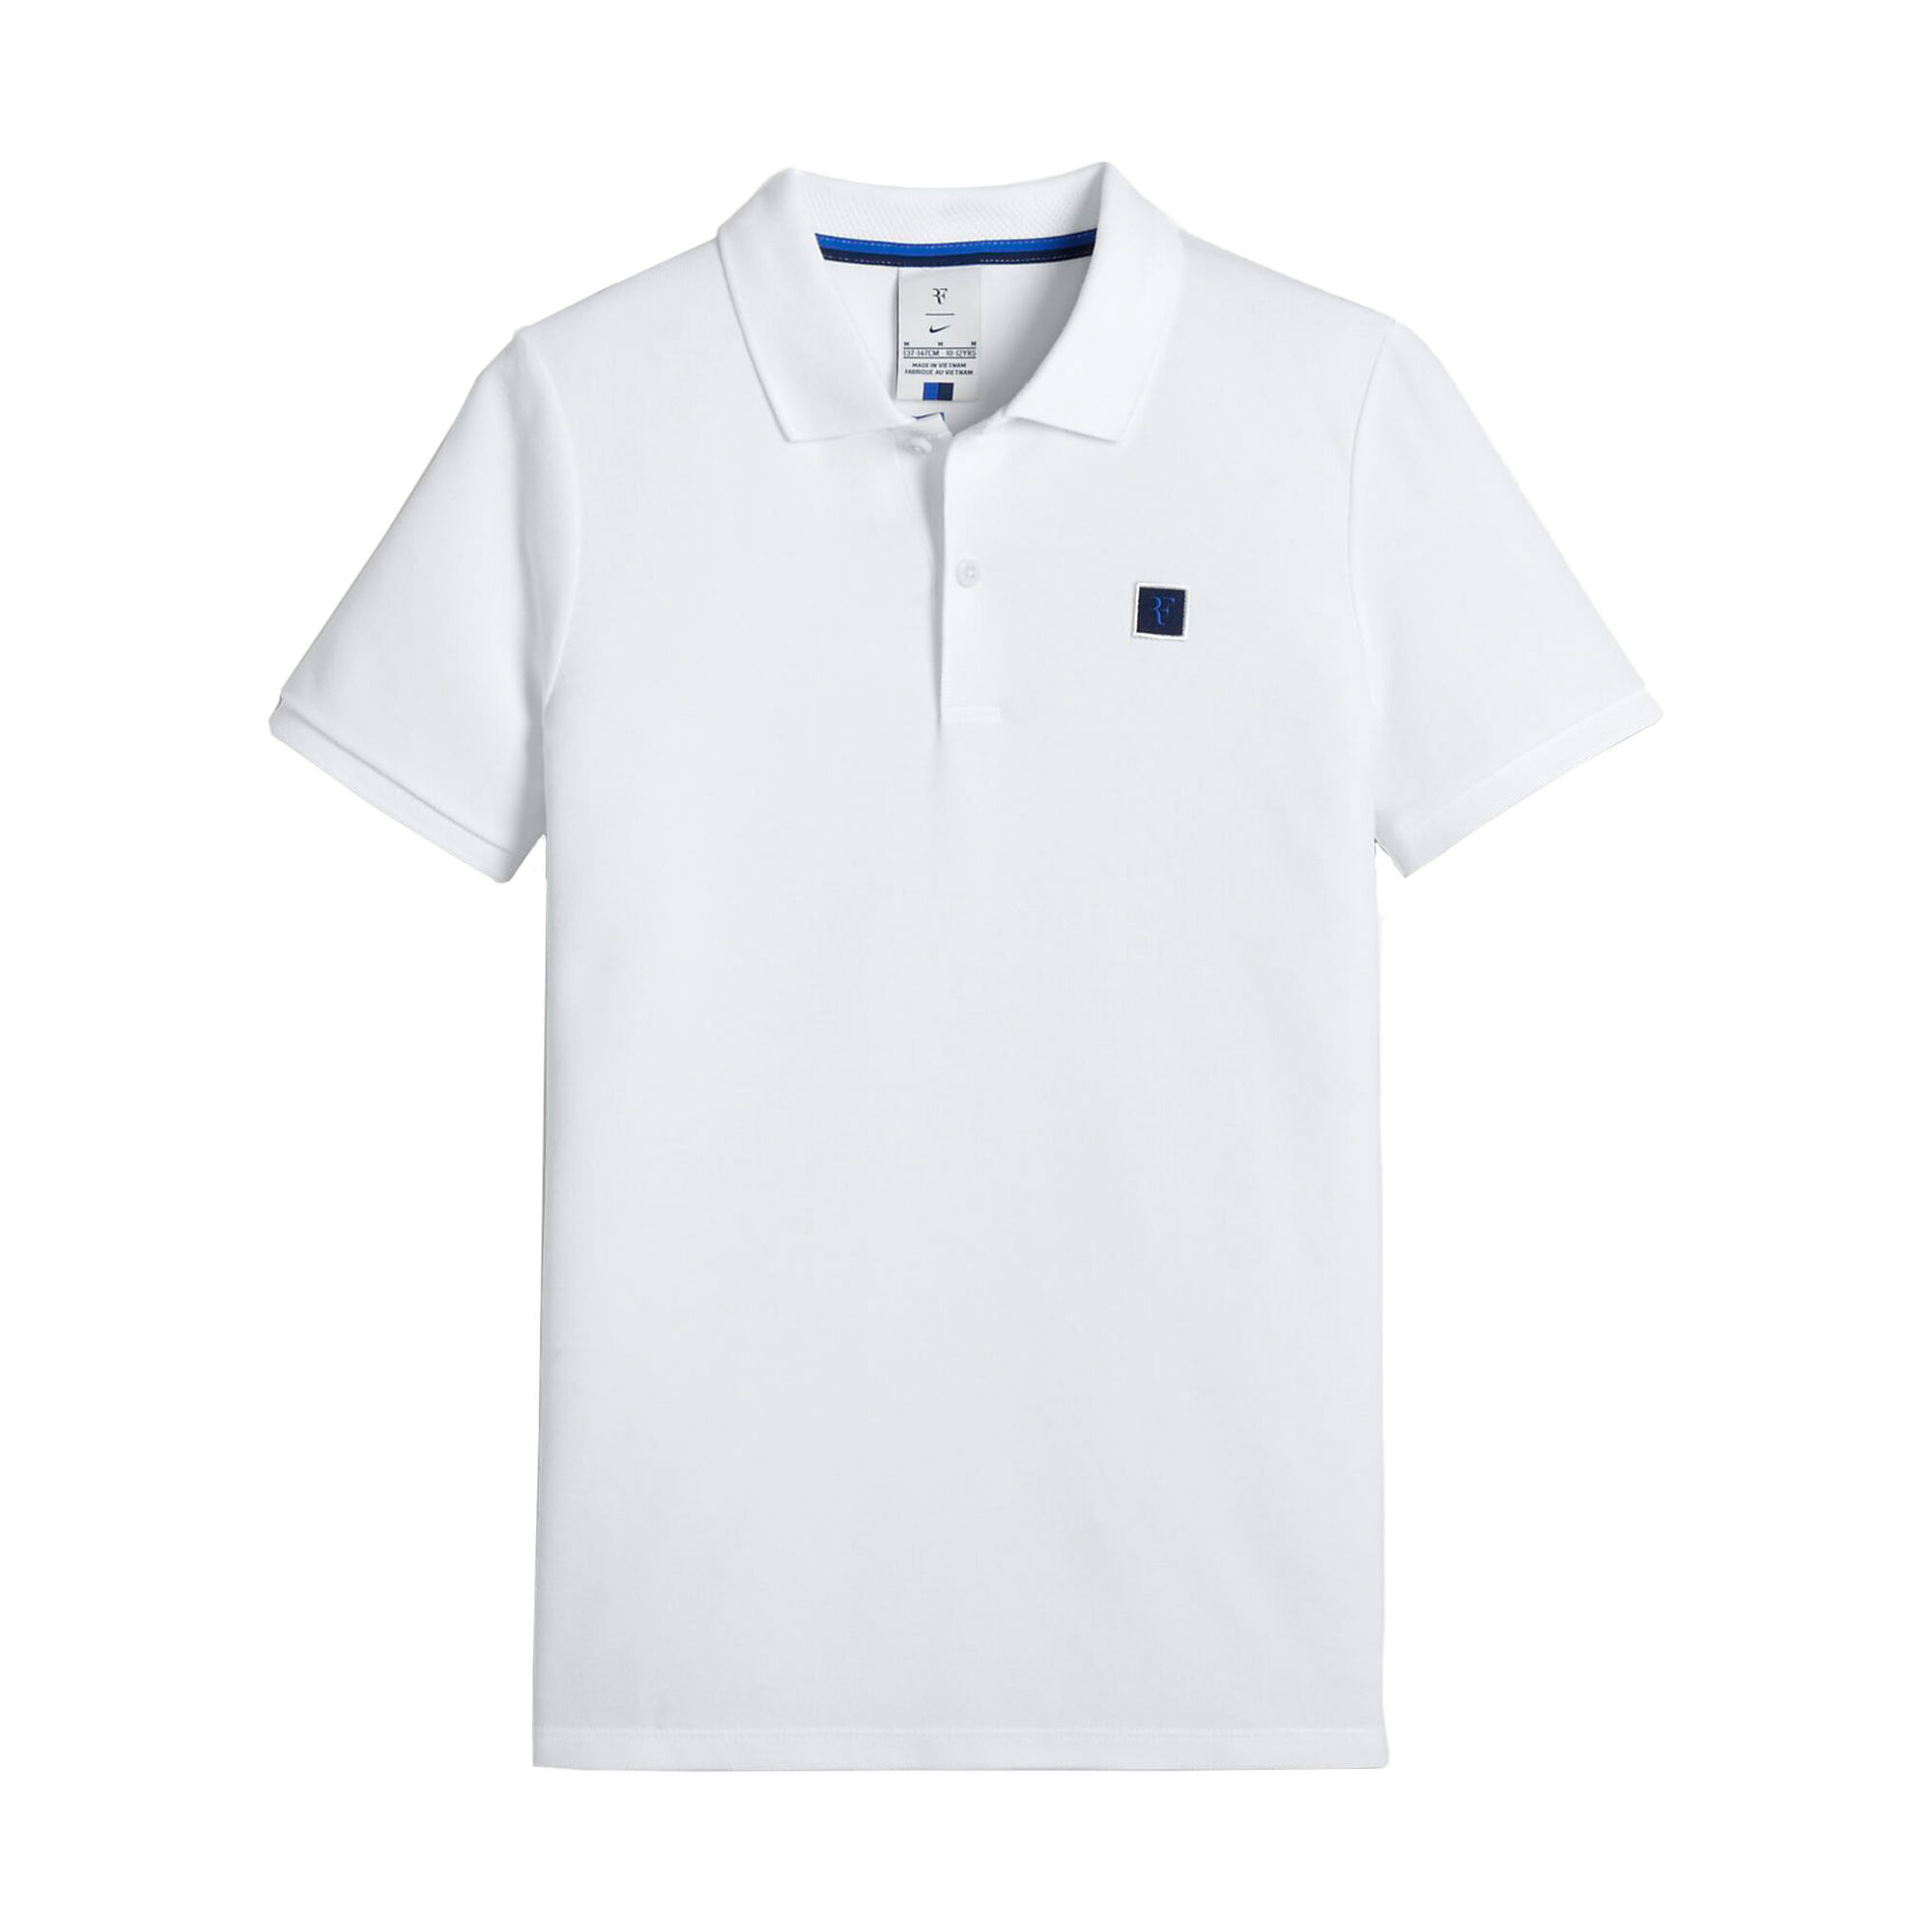 Contable camuflaje Apuesta Nike Roger Federer Court Essential Polo Chicos - Blanco compra online |  Tennis-Point